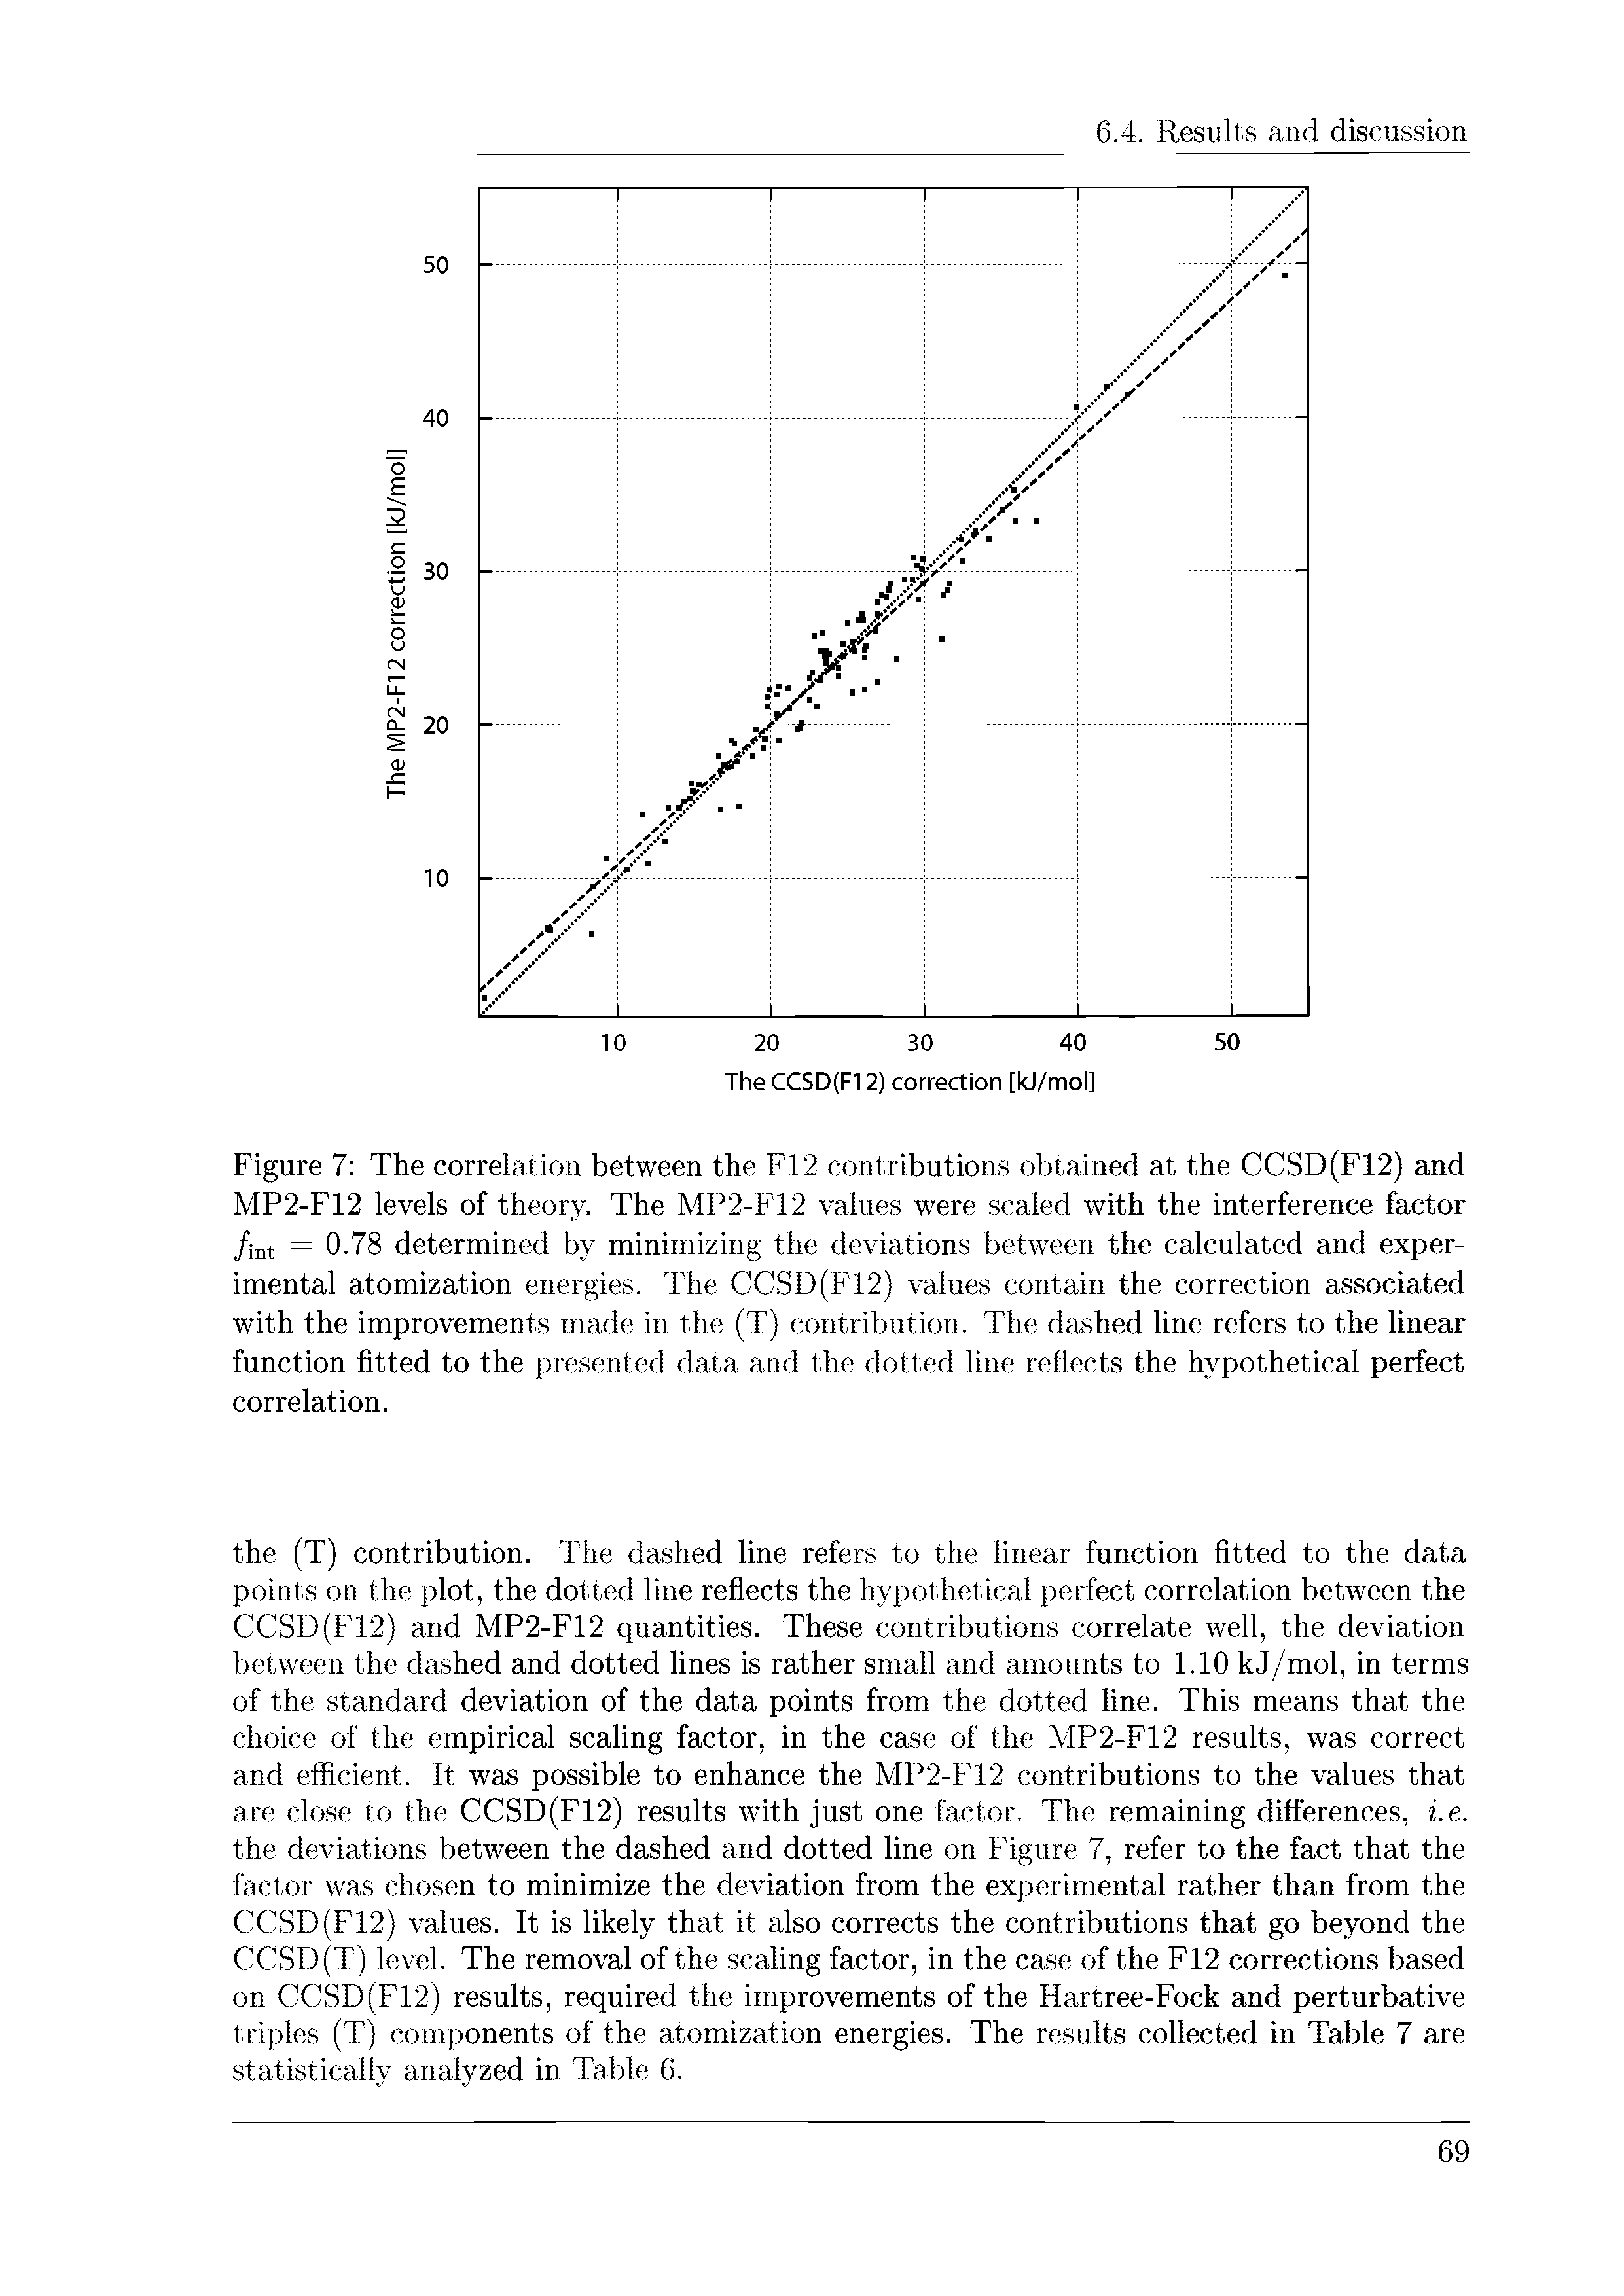 Figure 7 The correlation between the F12 contributions obtained at the CCSD(F12) and MP2-F12 levels of theory. The MP2-F12 values were scaled with the interference factor /int = 0.78 determined by minimizing the deviations between the calculated and experimental atomization energies. The CCSD(F12) values contain the correction associated with the improvements made in the (T) contribution. The dashed line refers to the linear function fitted to the presented data and the dotted line reflects the hypothetical perfect correlation.